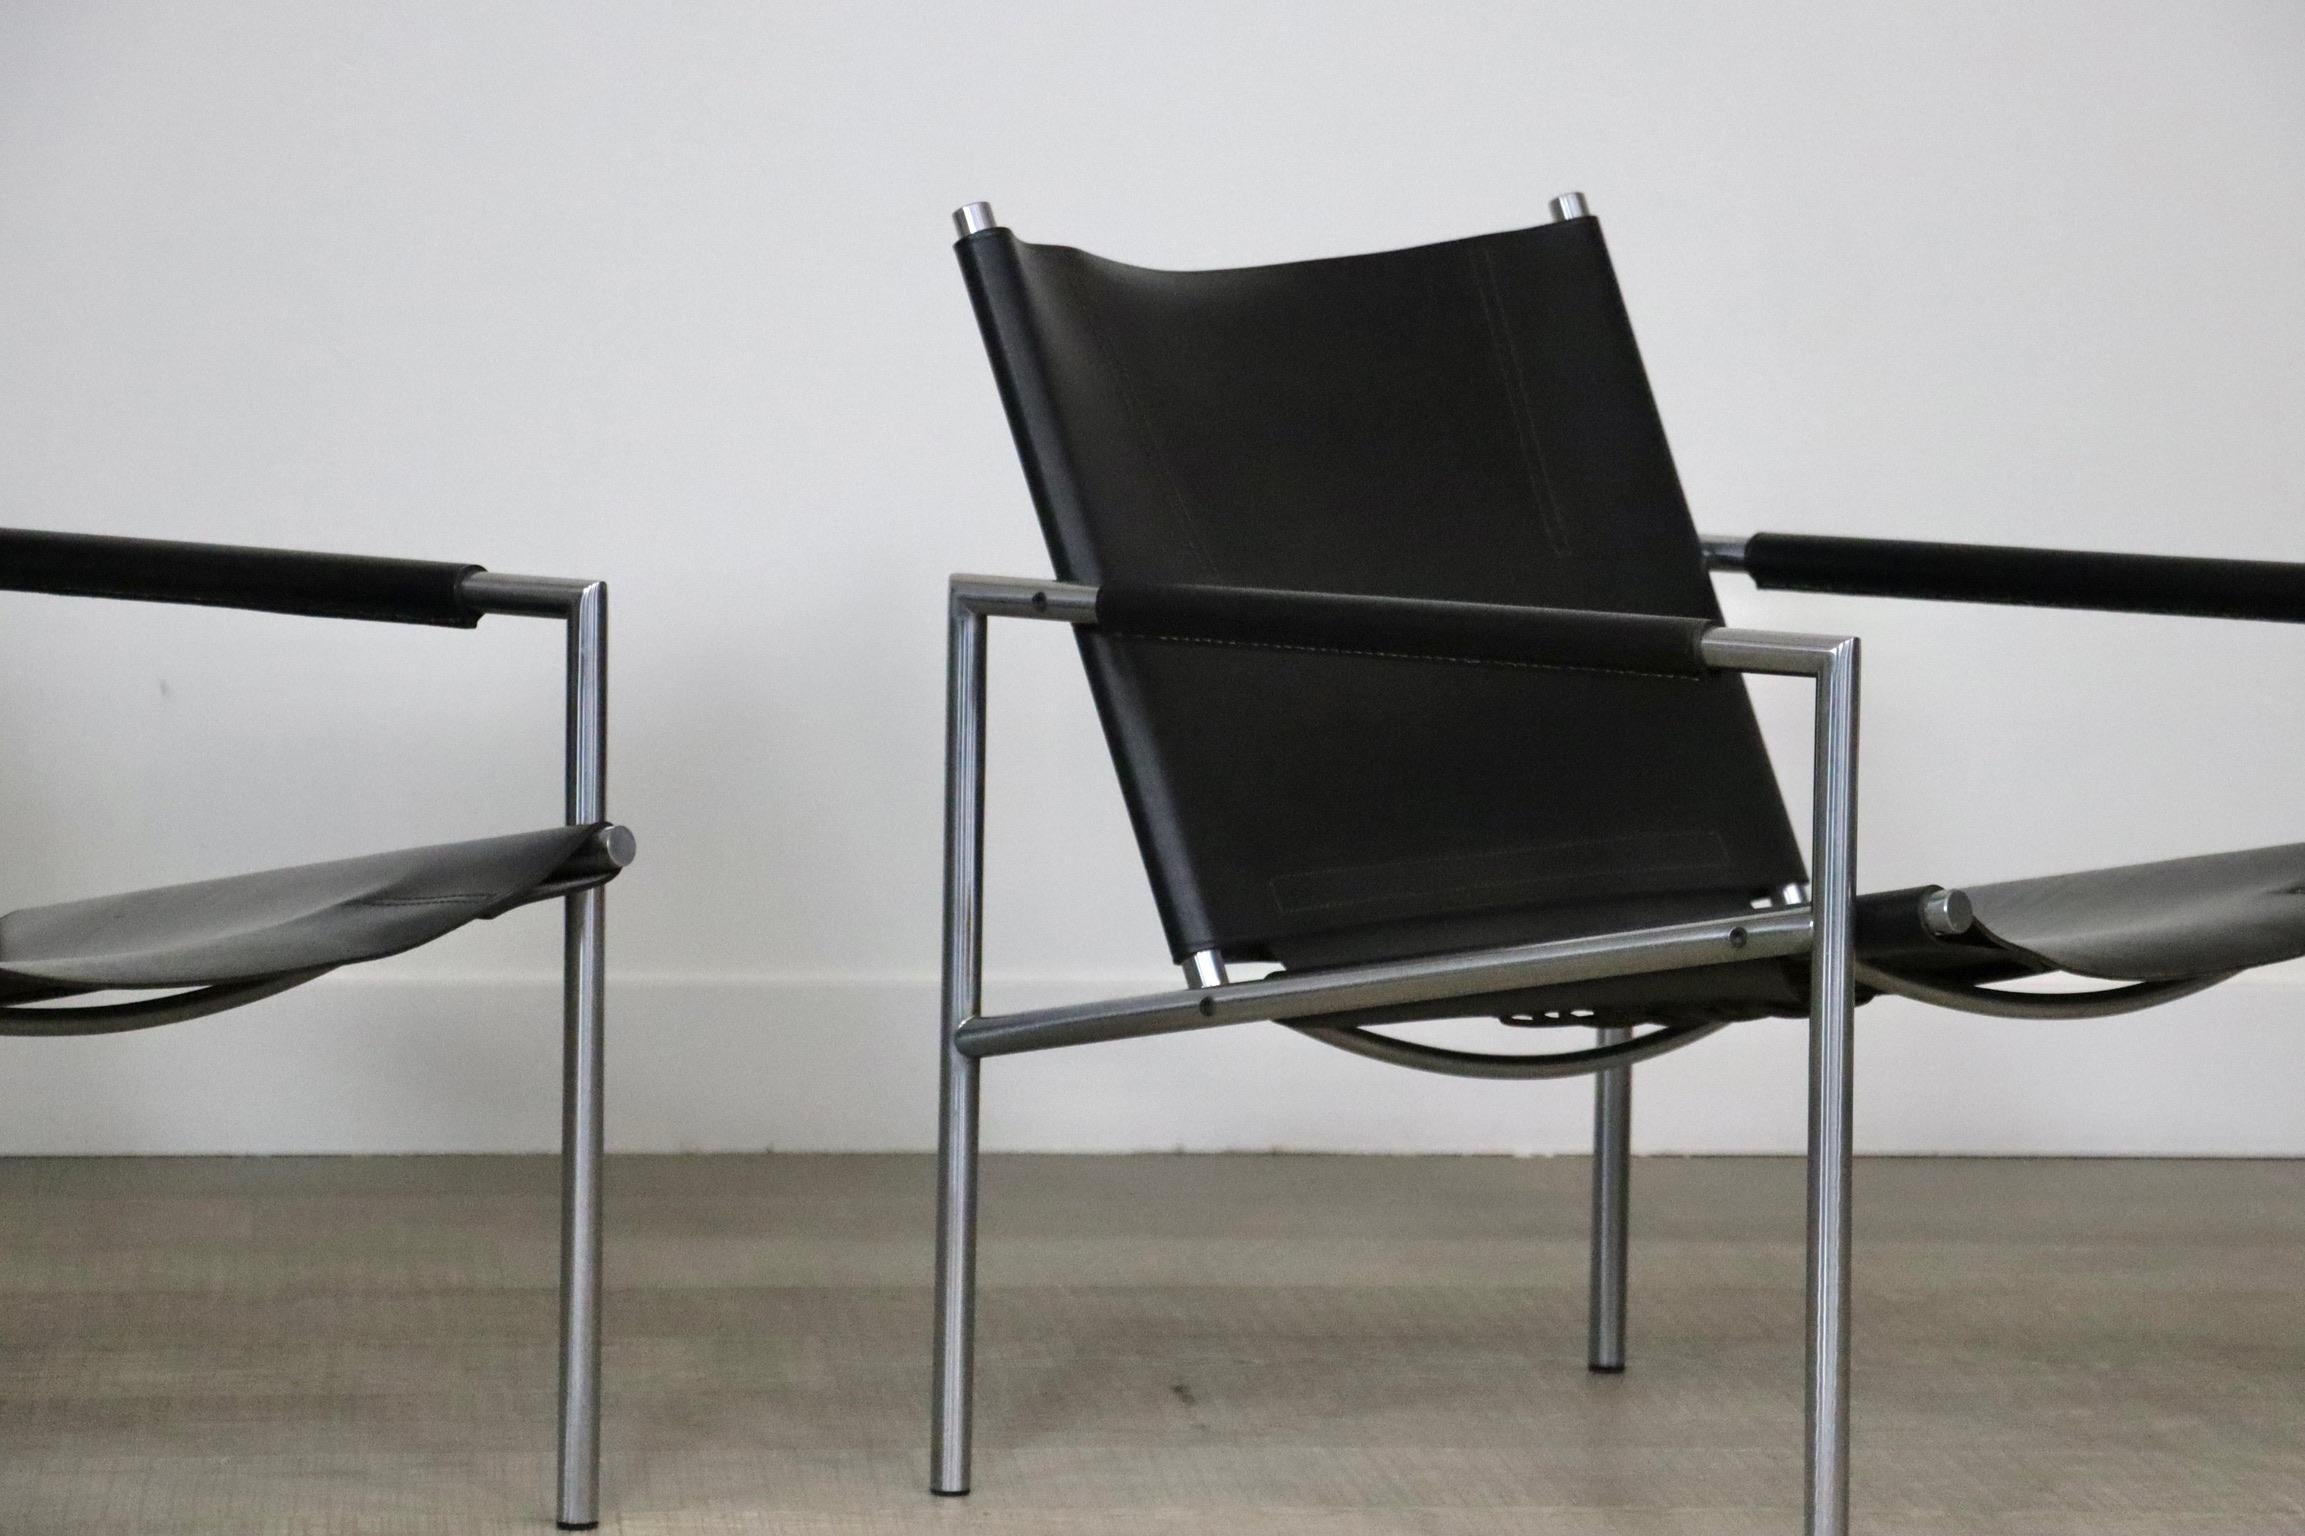 Nice pair of SZ02 armchairs by Martin Visser for ‘T Spectrum, The Netherlands, 1965. These chairs have a brushed steel tubular frame and very thick black saddle leather seats and arm rests finishing. This minimalistic design will elevate any space,